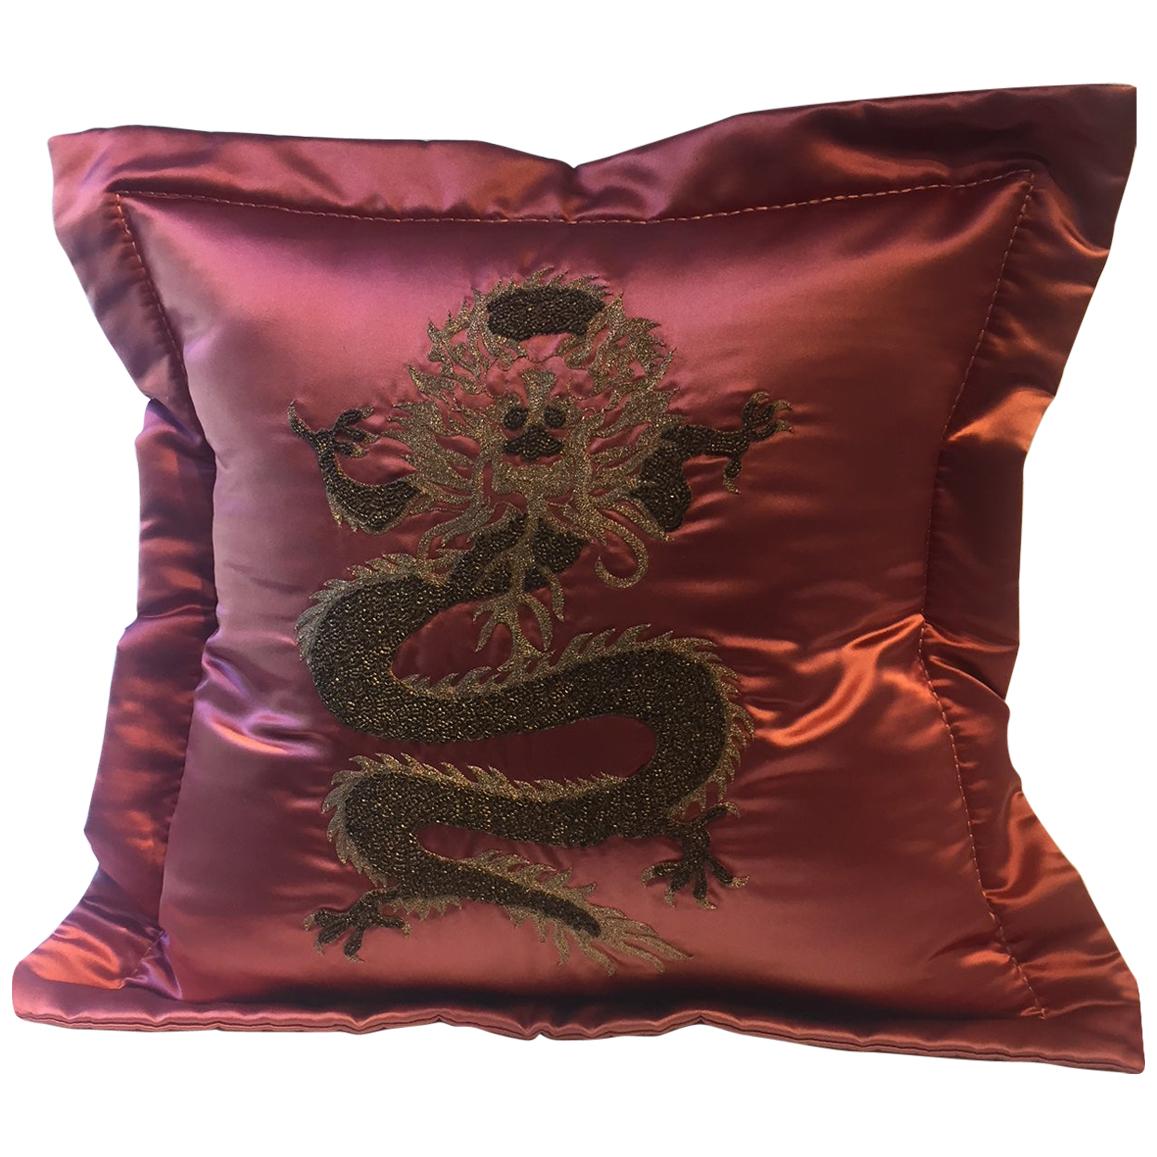 Dragon Design Cushion Silk Color Strawberry Red Hand Embroidery